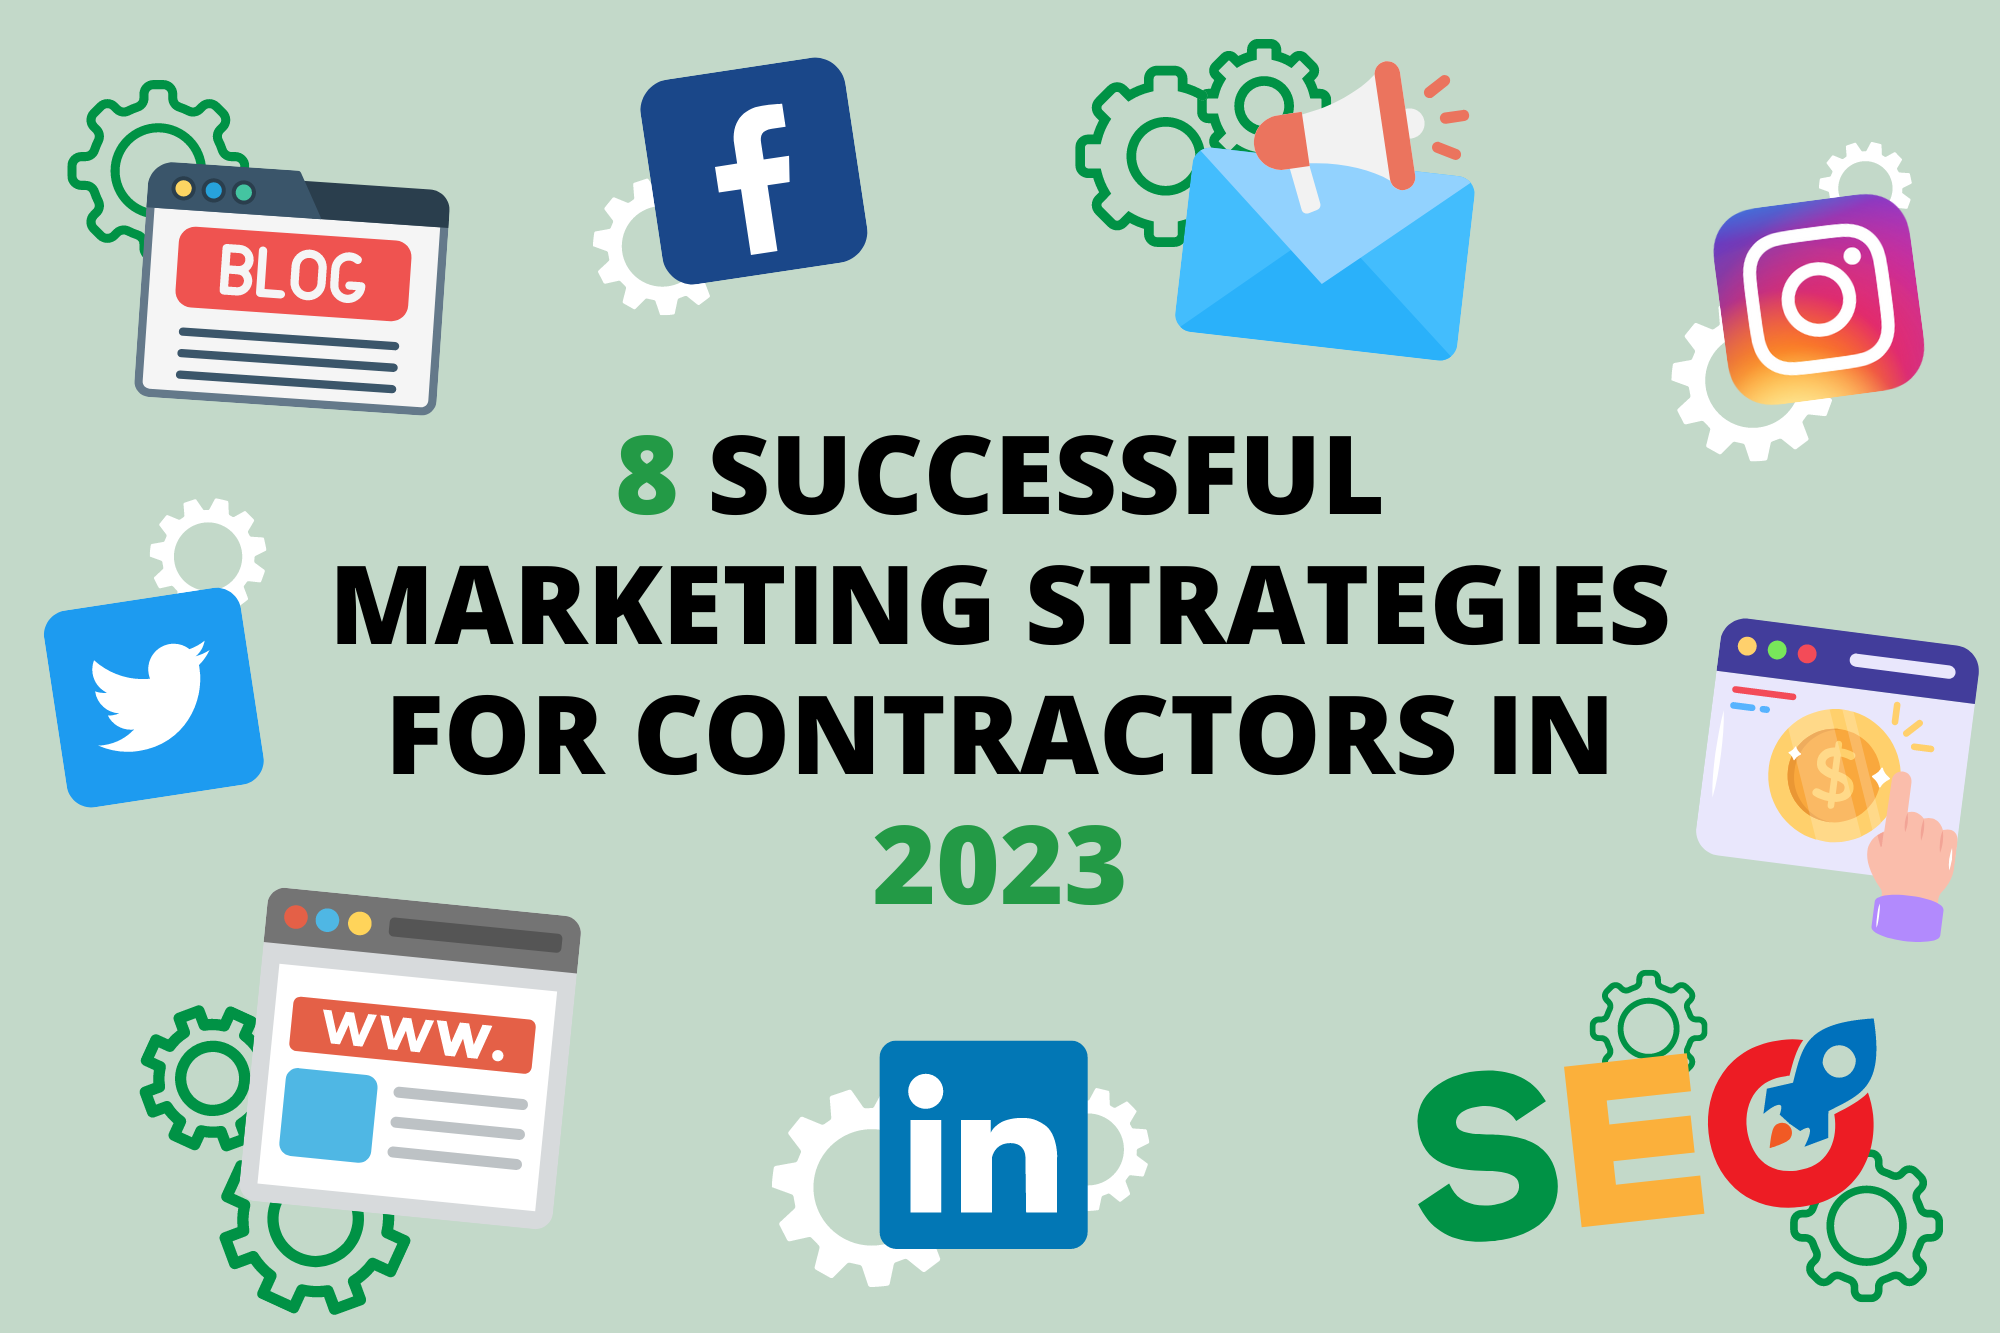 8 Successful Marketing Strategies for Contractors in 2023